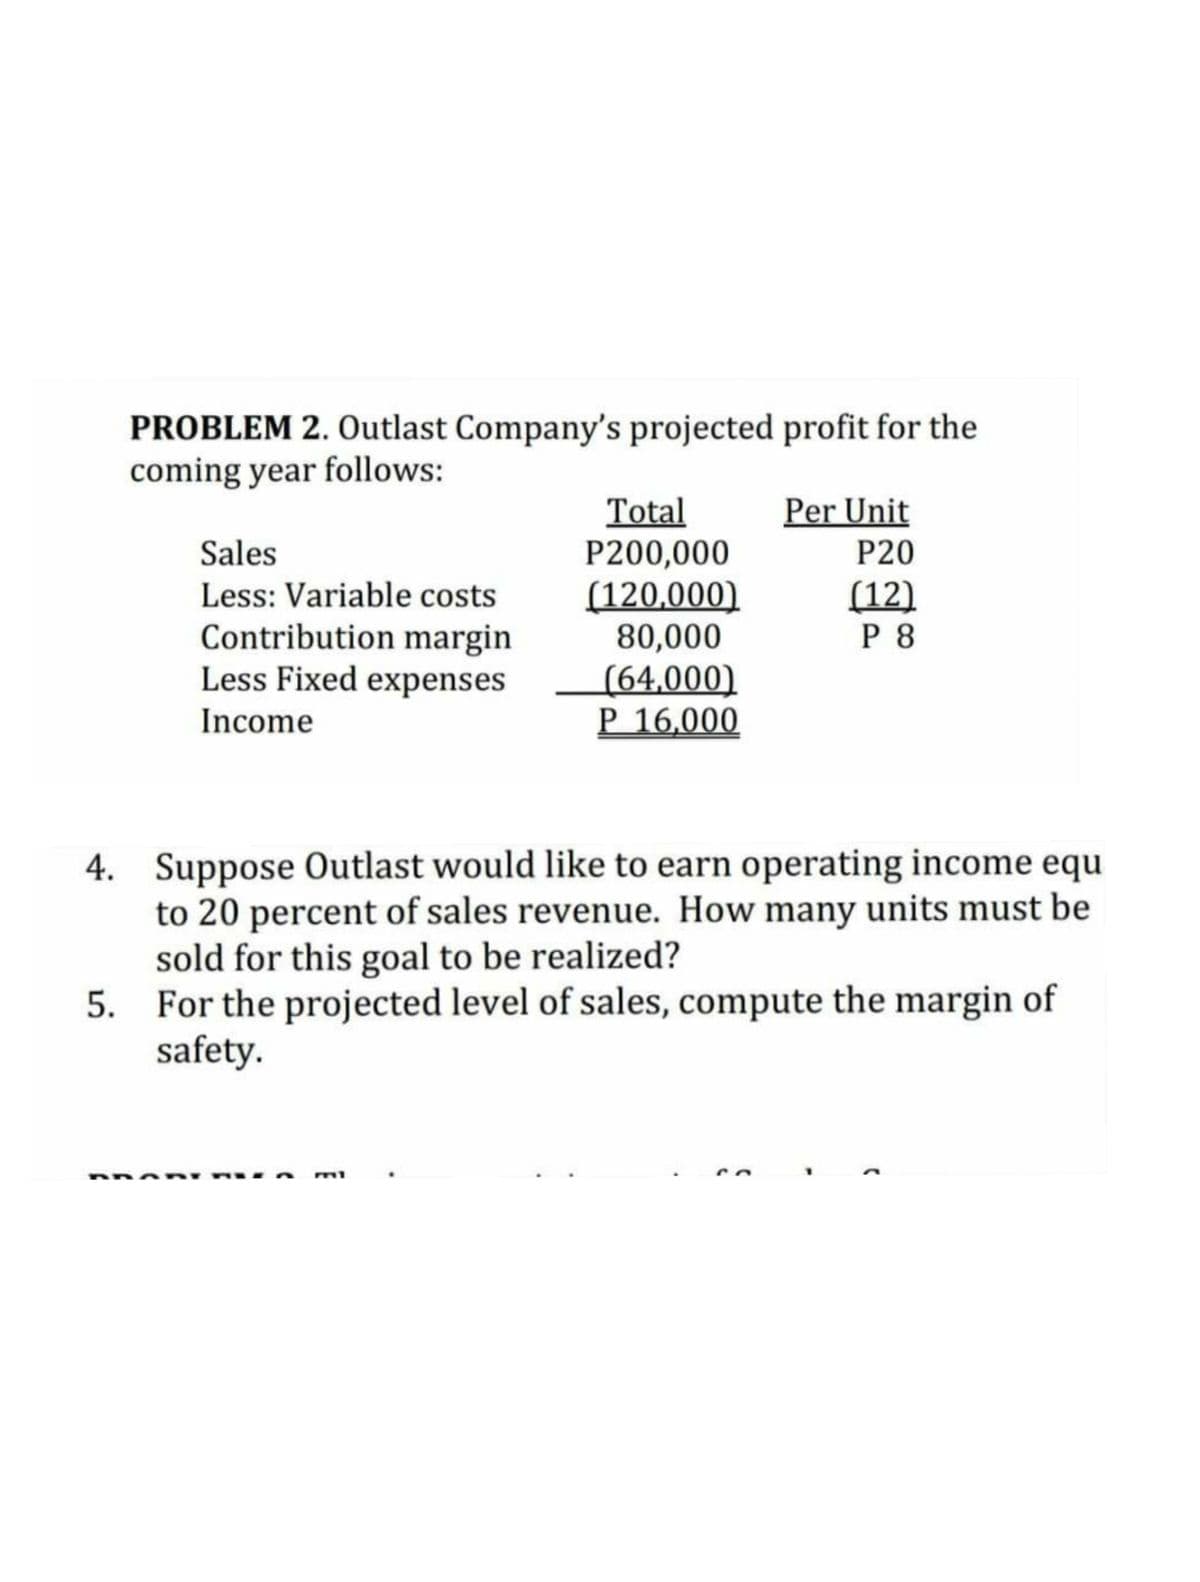 PROBLEM 2. Outlast Company's projected profit for the
coming year follows:
Per Unit
Total
P200,000
(120,000)
80,000
(64,000)
P 16,000
Sales
Less: Variable costs
P20
(12)
P 8
Contribution margin
Less Fixed expenses
Income
4. Suppose Outlast would like to earn operating income equ
to 20 percent of sales revenue. How many units must be
sold for this goal to be realized?
5. For the projected level of sales, compute the margin of
safety.
